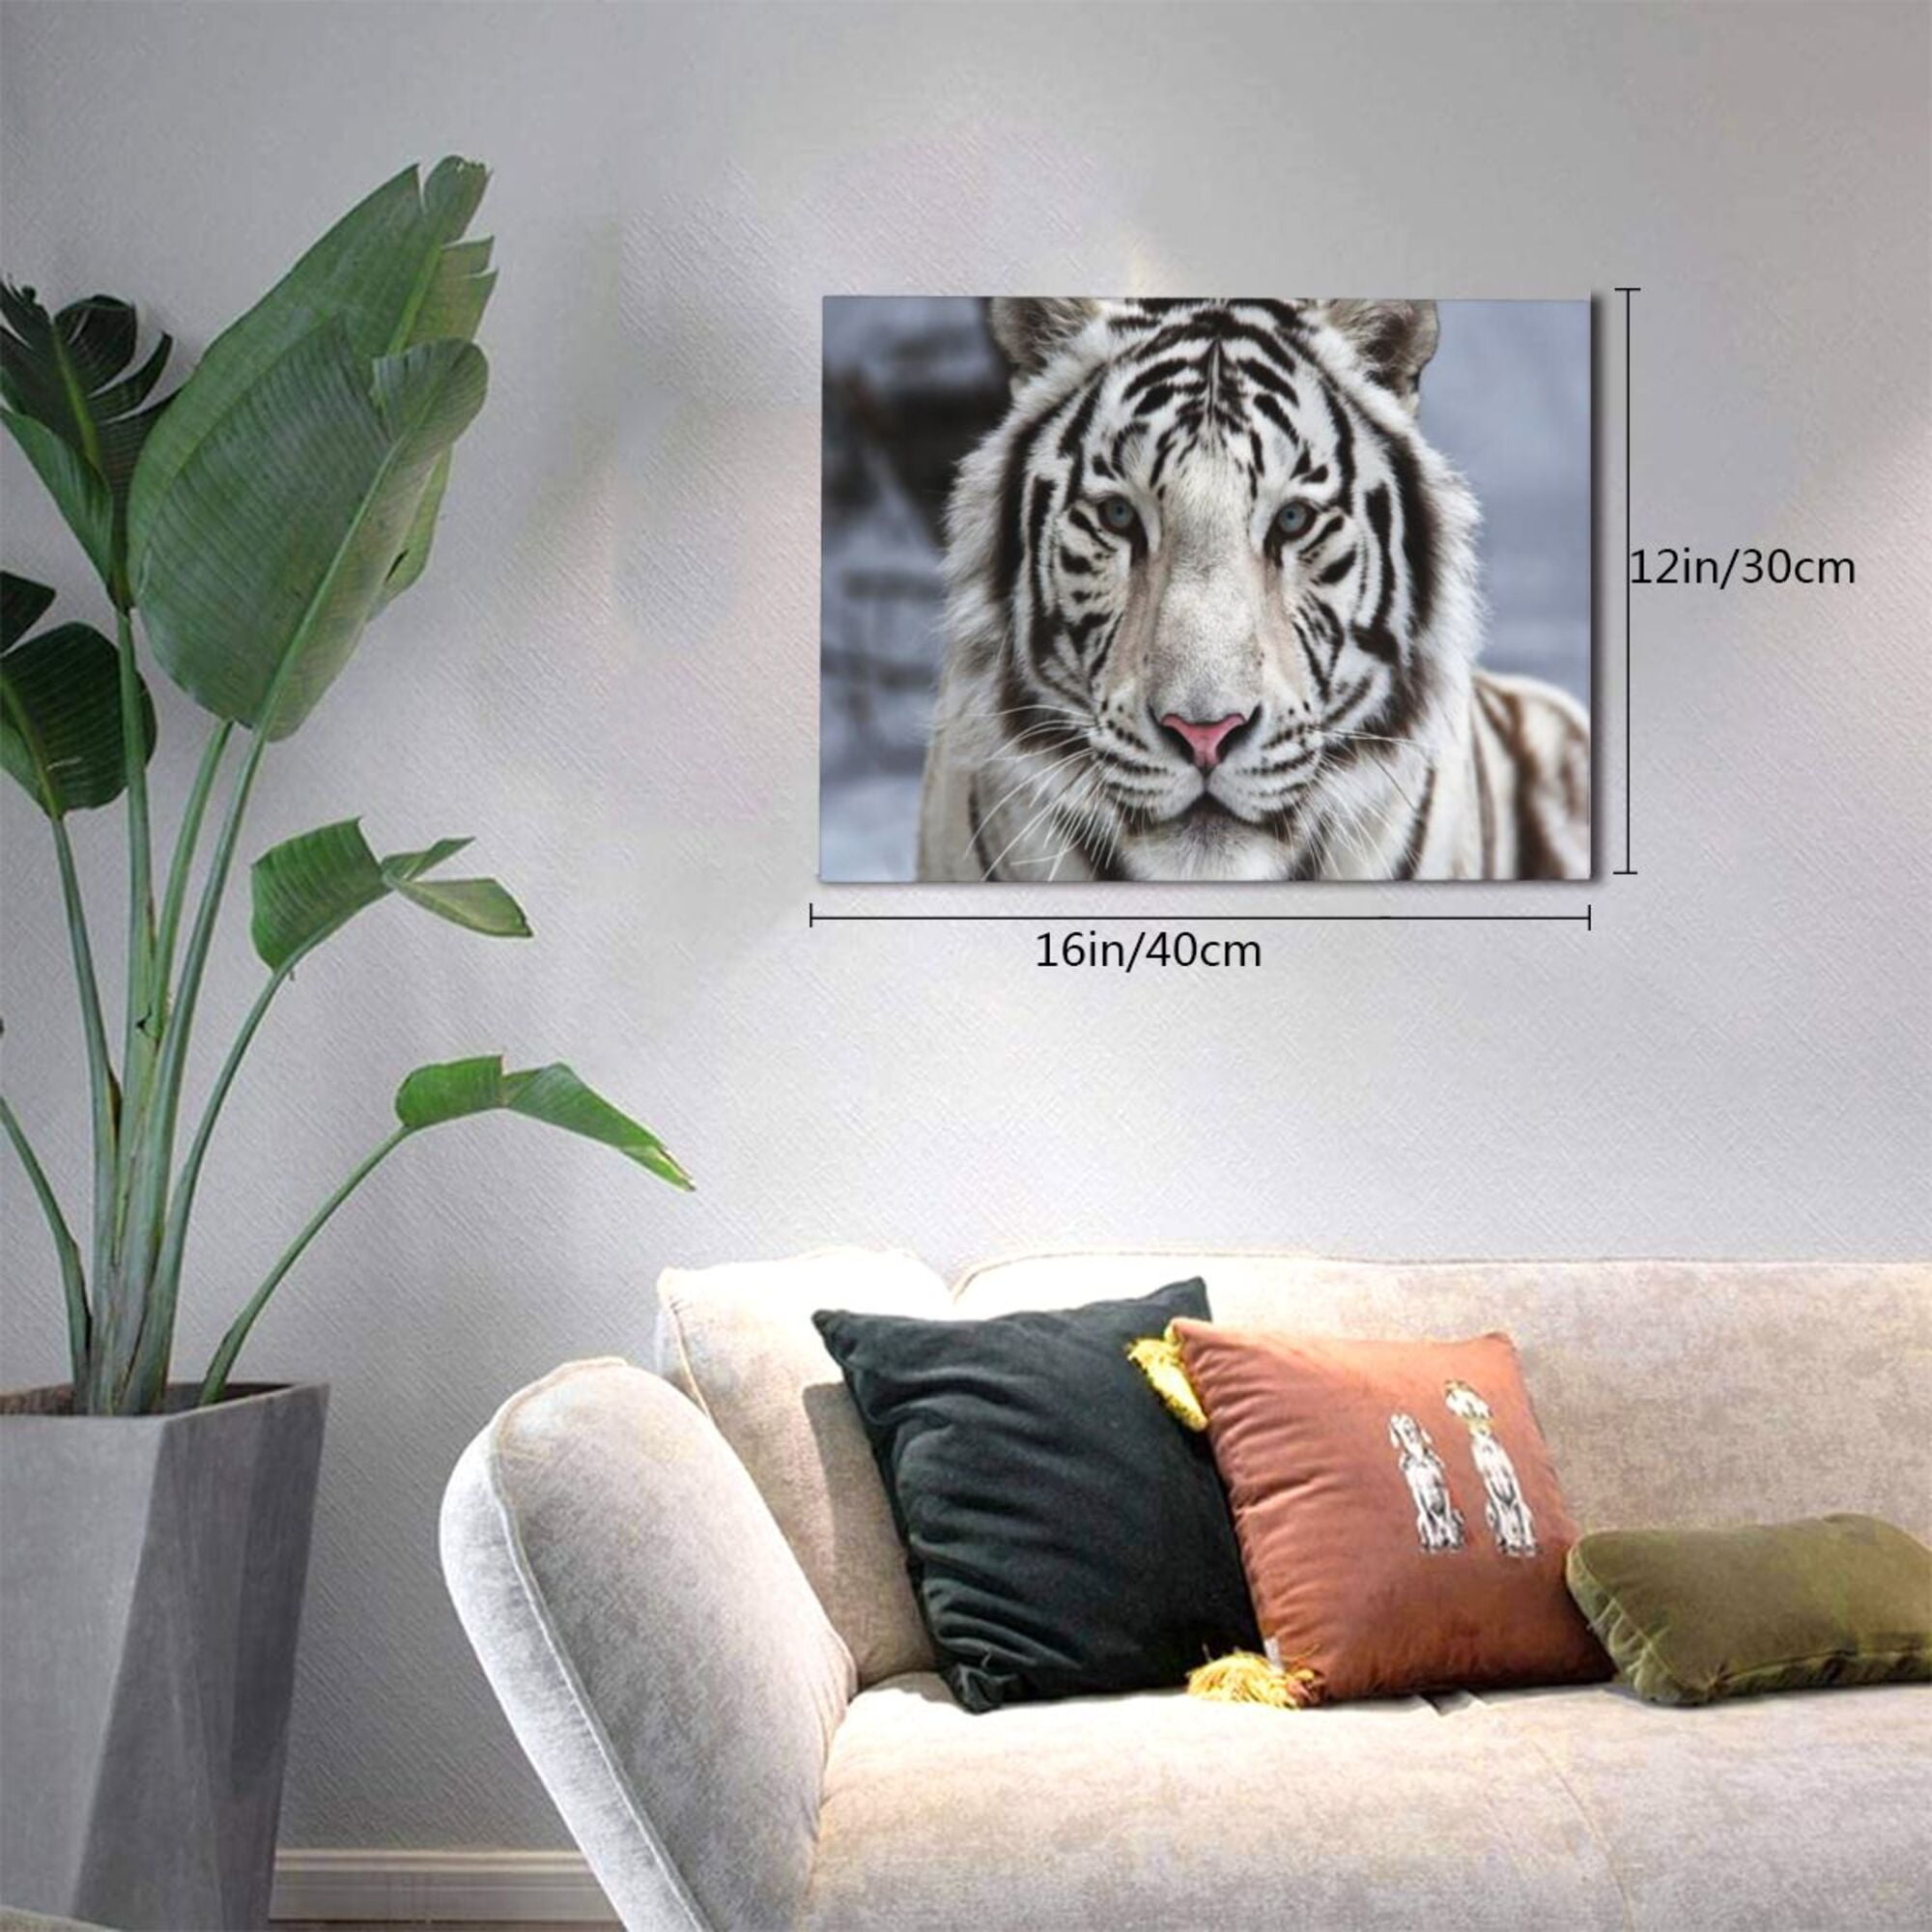 Framed Artwork For Modern Wall Bedroom Tiger Bathroom Bathroom Living Room 12x16in Painting White Decor Decor Canvas Decorations